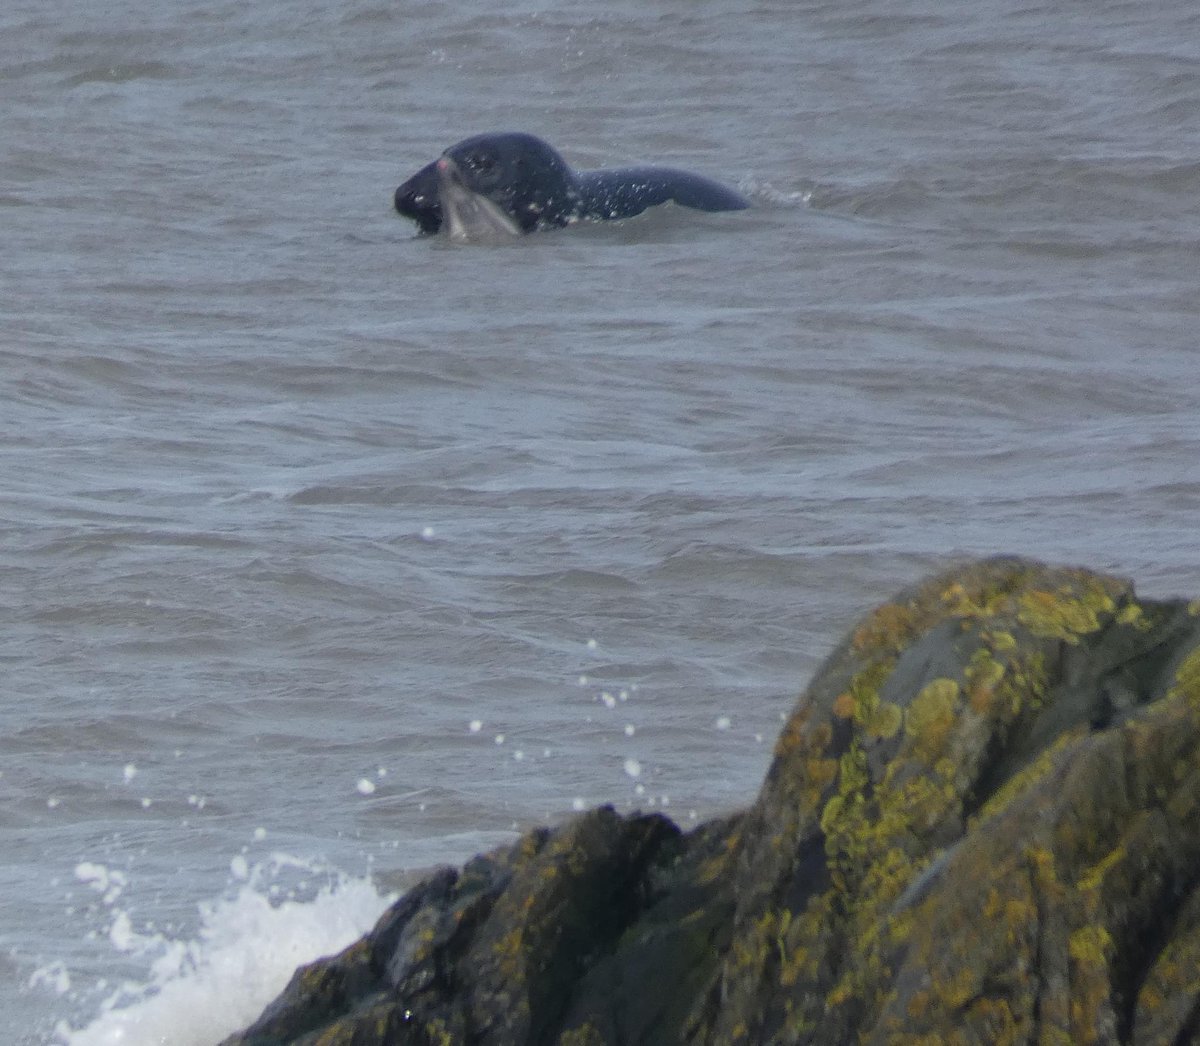 IWDG report on what is likely to be a first for Irish waters. Wed. 27th March produced an intriguing sighting of an interaction between an adult grey seal and a common dolphin, the outcome of which remains uncertain. See full story.... iwdg.ie/grey-seal-inte…